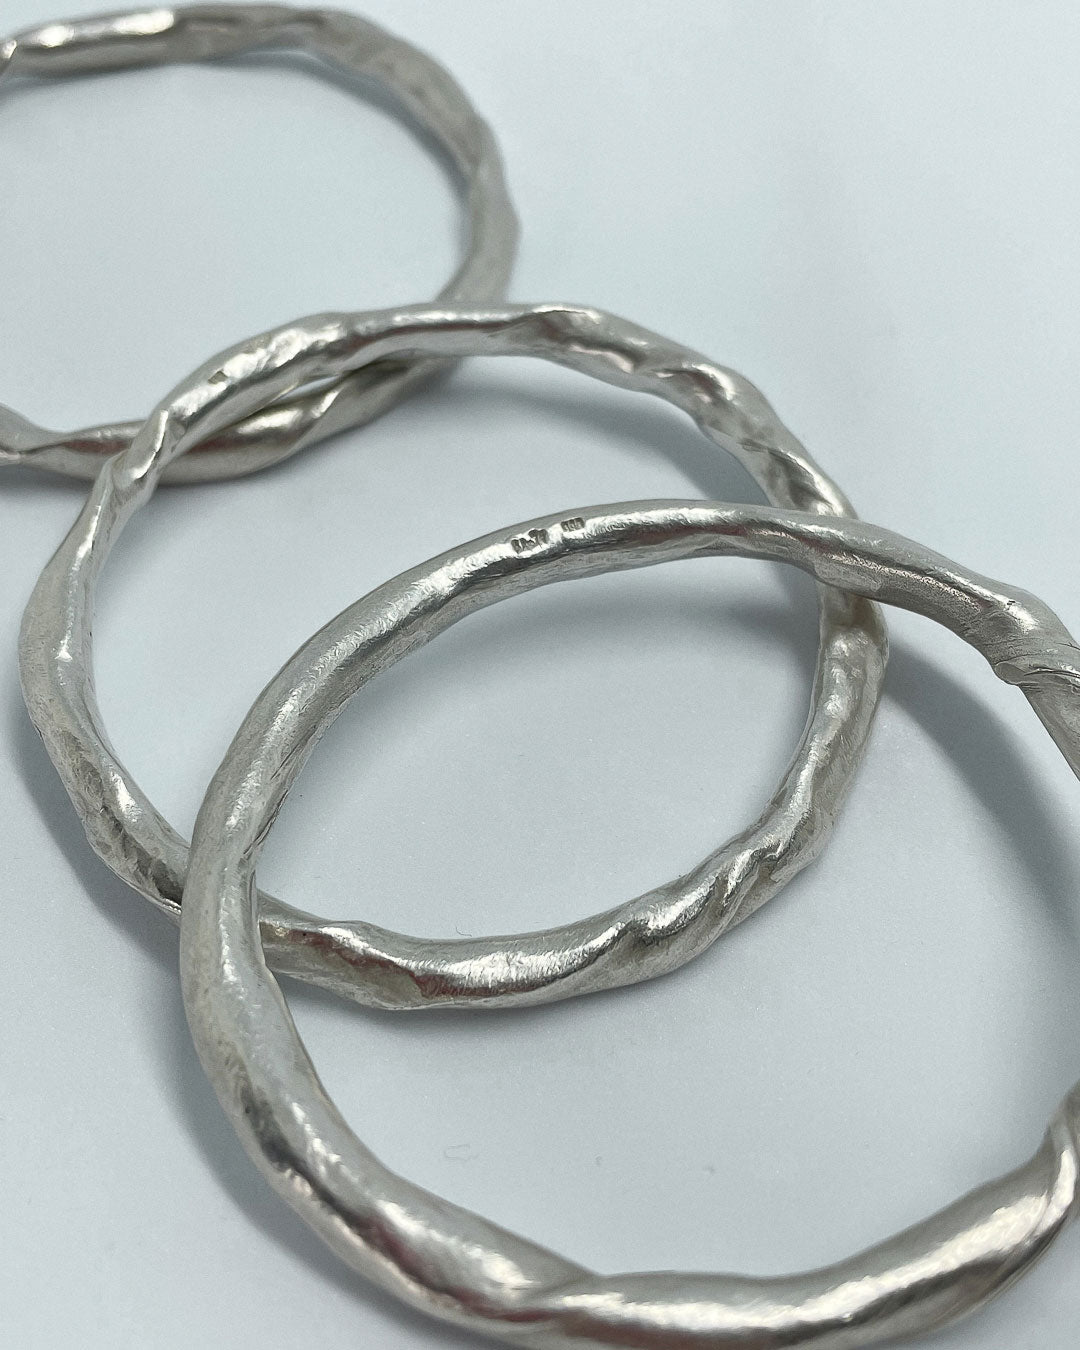 A close up of the makers marks for 3 heavy organic round Fine Silver Bangles lying on a flat surface